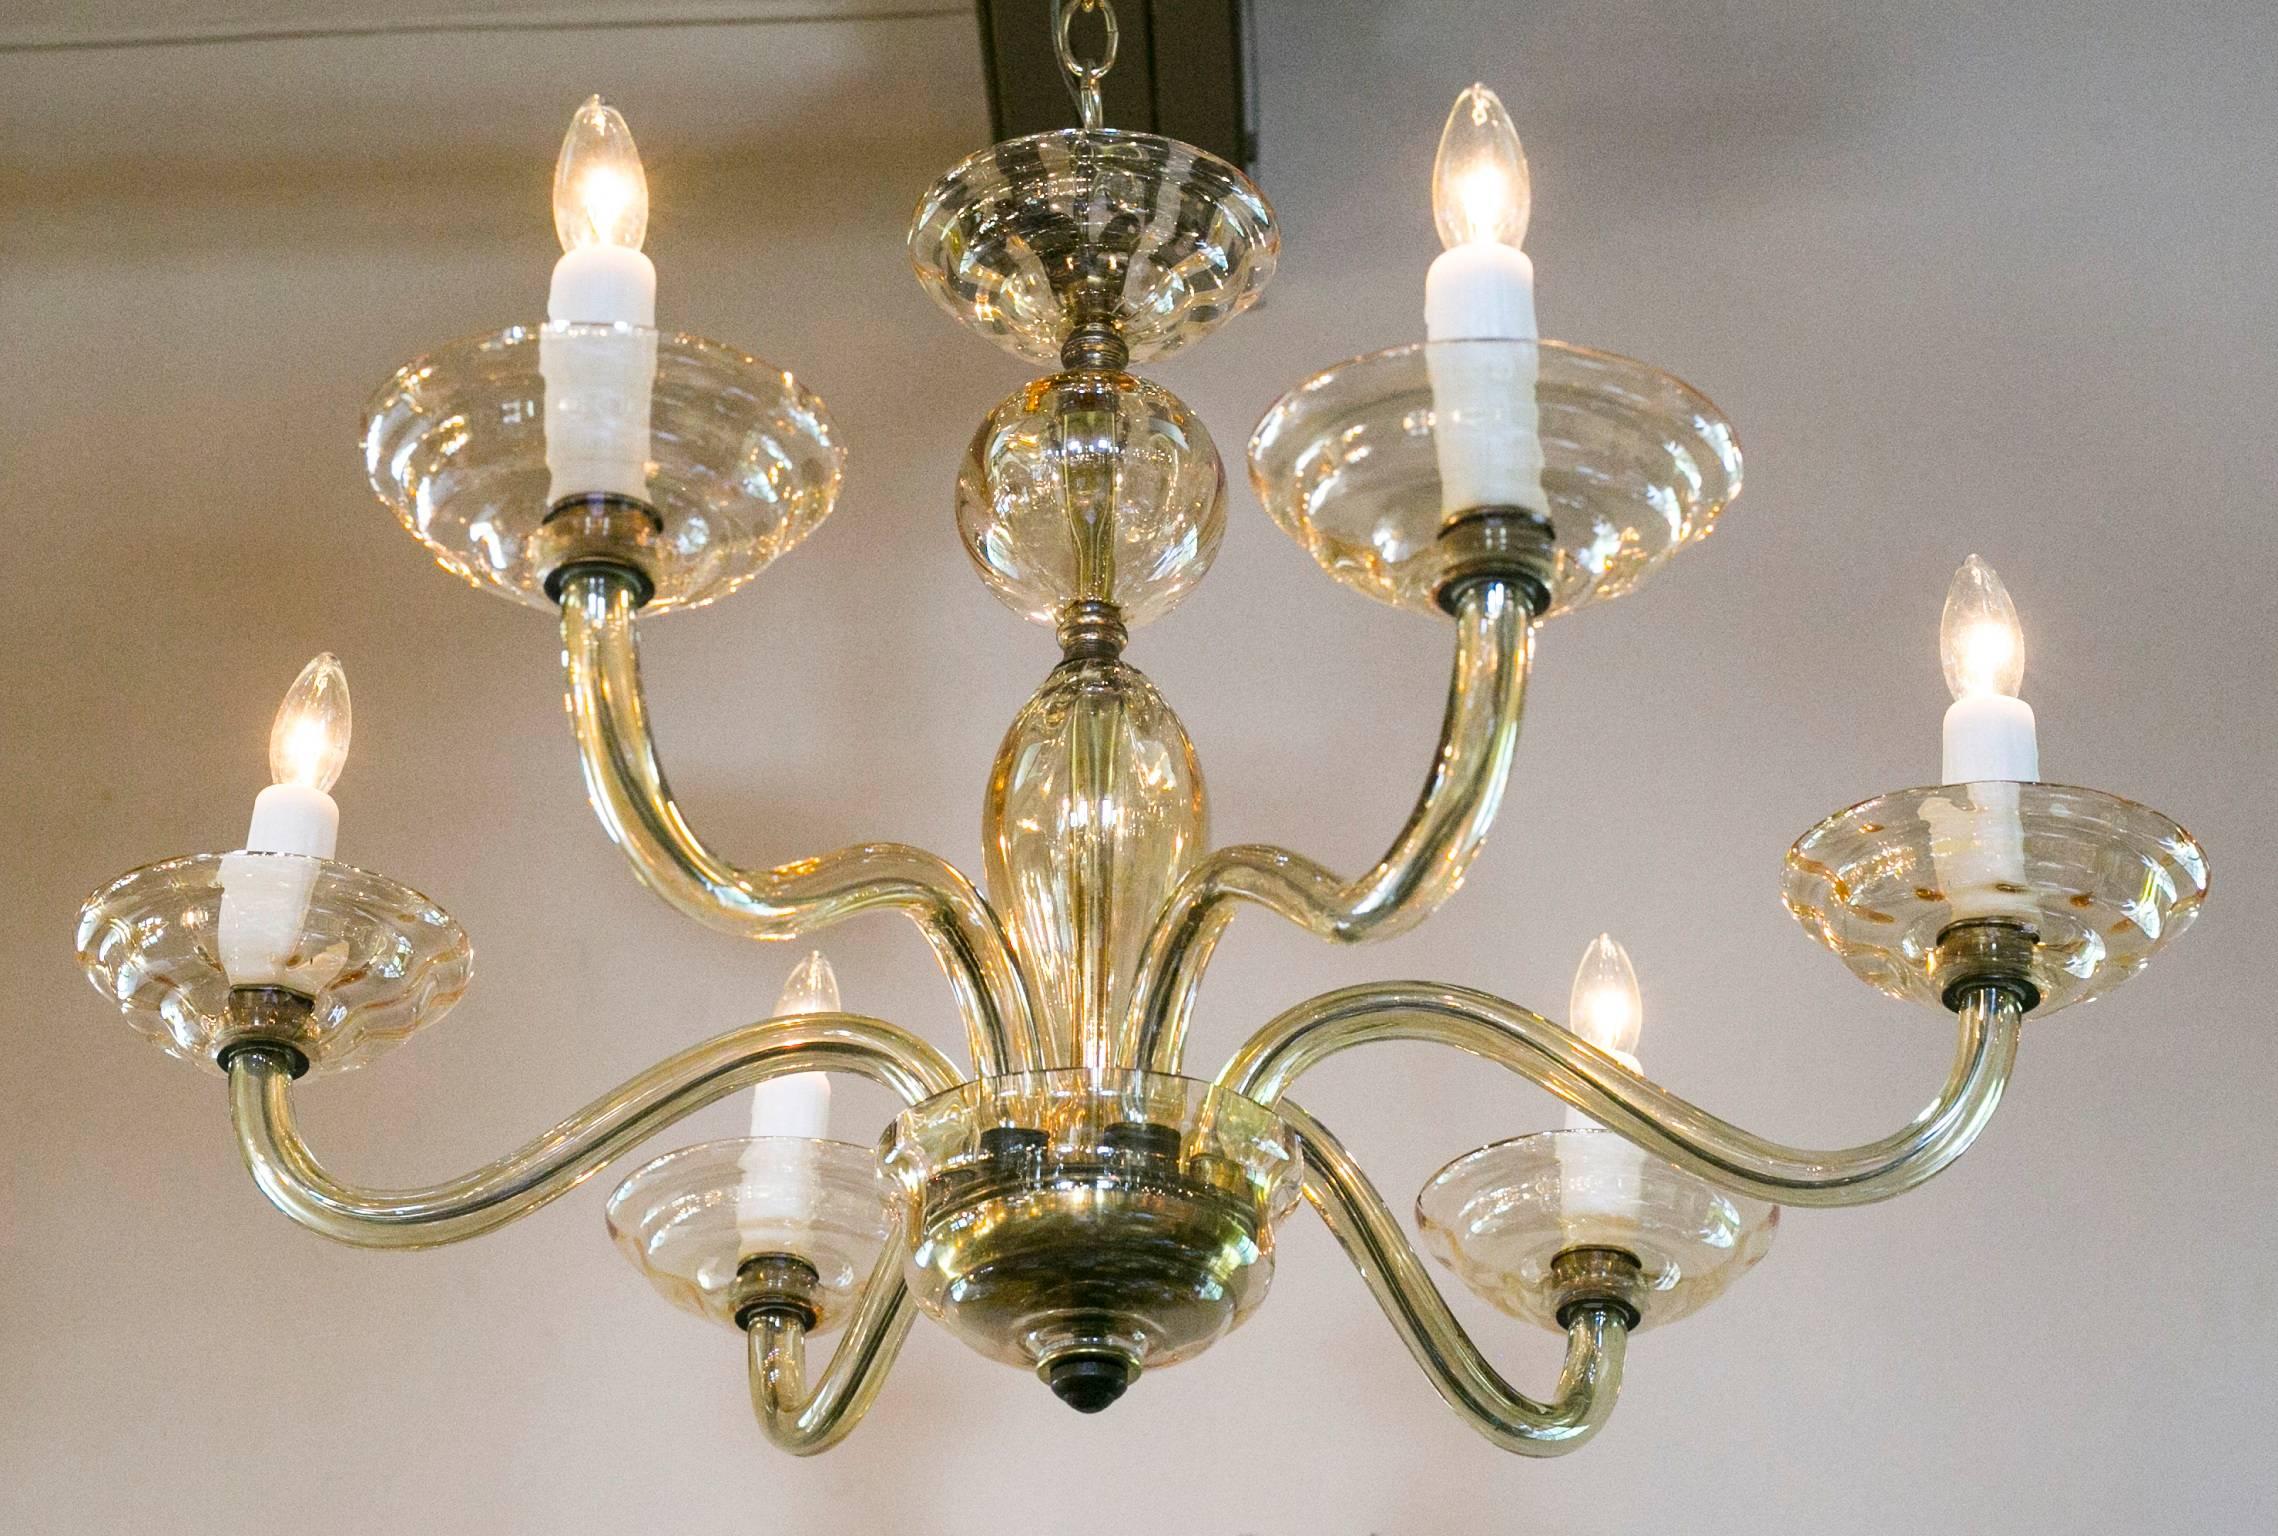 Blown-glass chandelier from Murano, Italy. Six arms with candelabra sockets, newly wired for the US with all UL listed parts. Comes with brass chain and canopy. In the Moderne style with interesting texture/pattern in the bobeche.